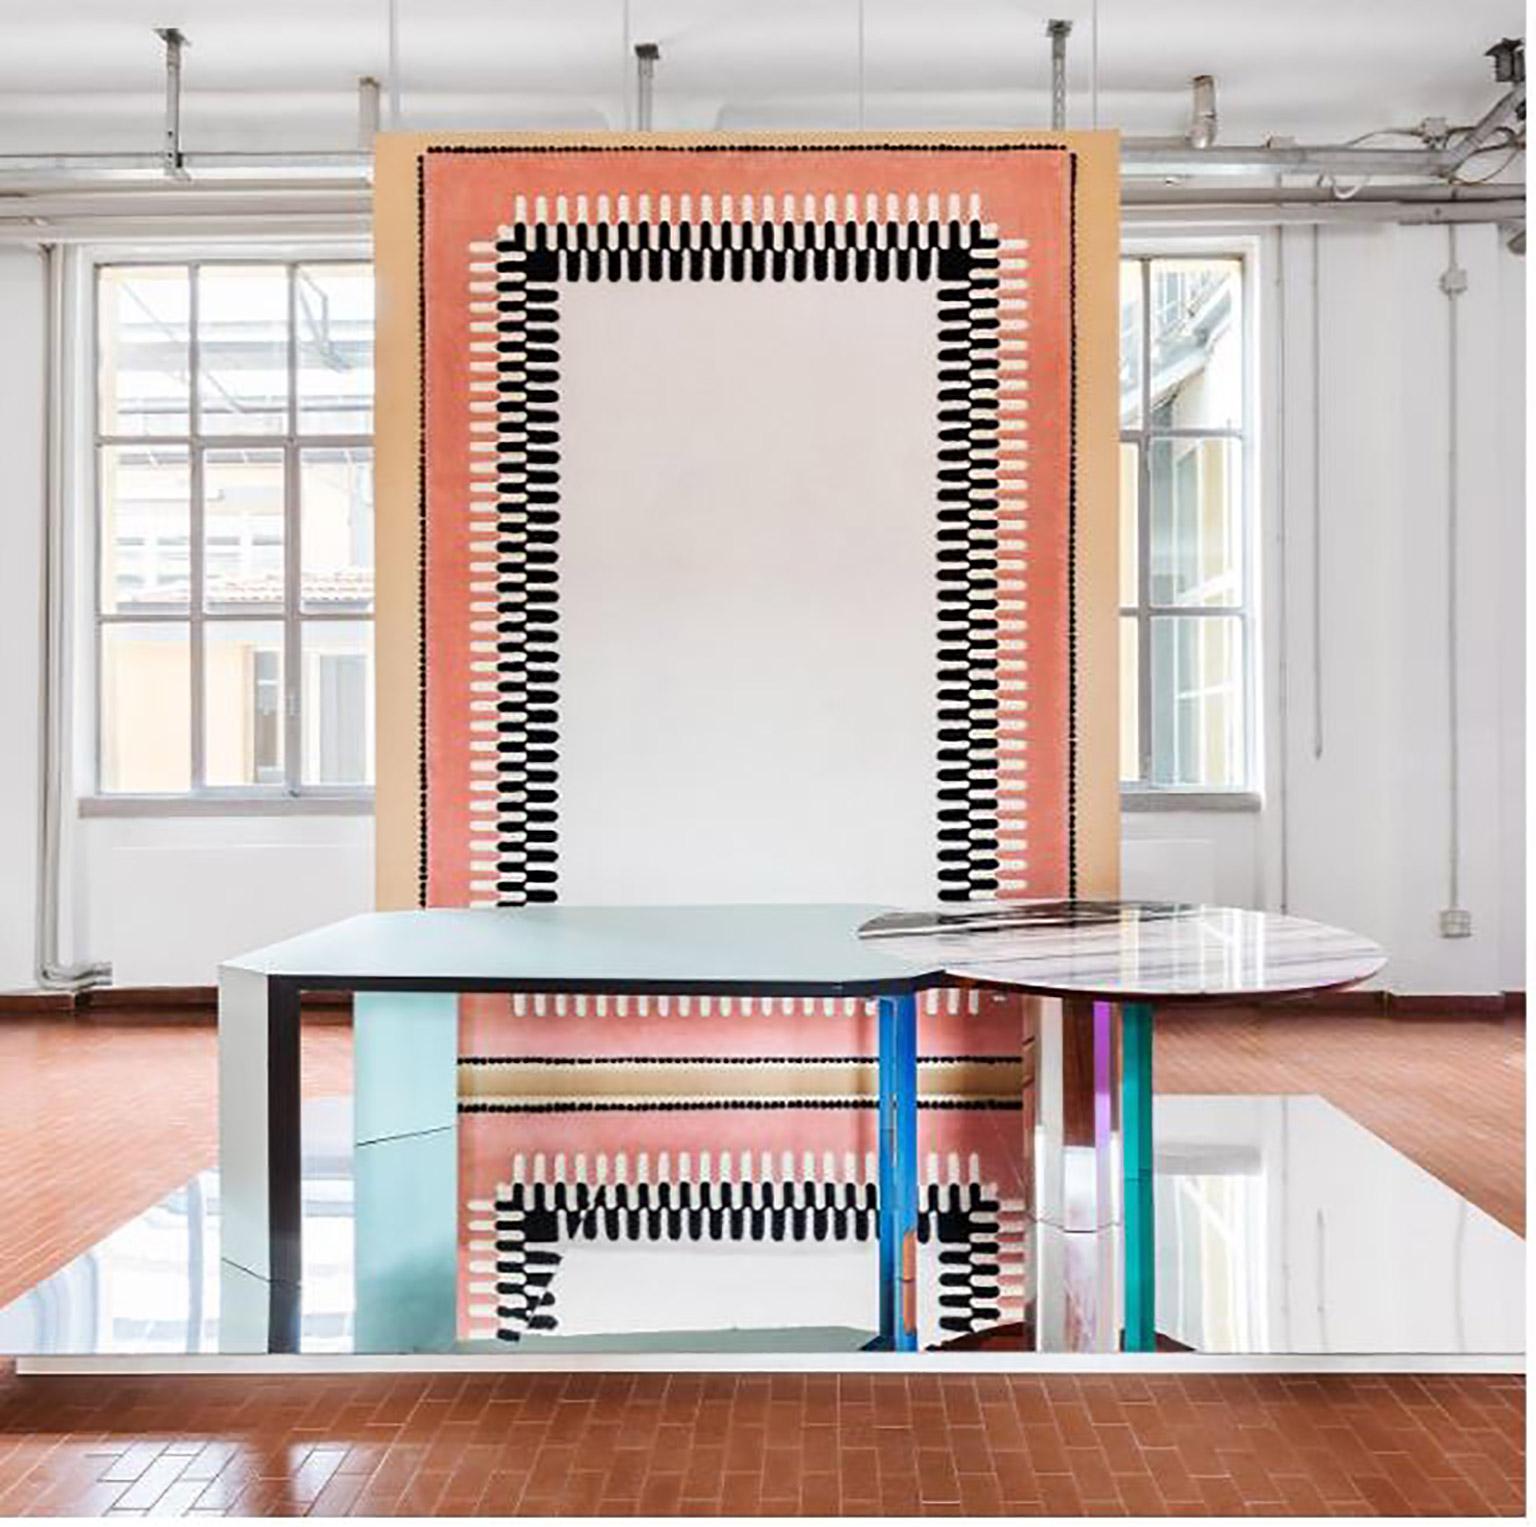 Duale Contemporary Table, Lasa White Marble, Red Glossy Mahogany, Steel In New Condition For Sale In Brooklyn, NY